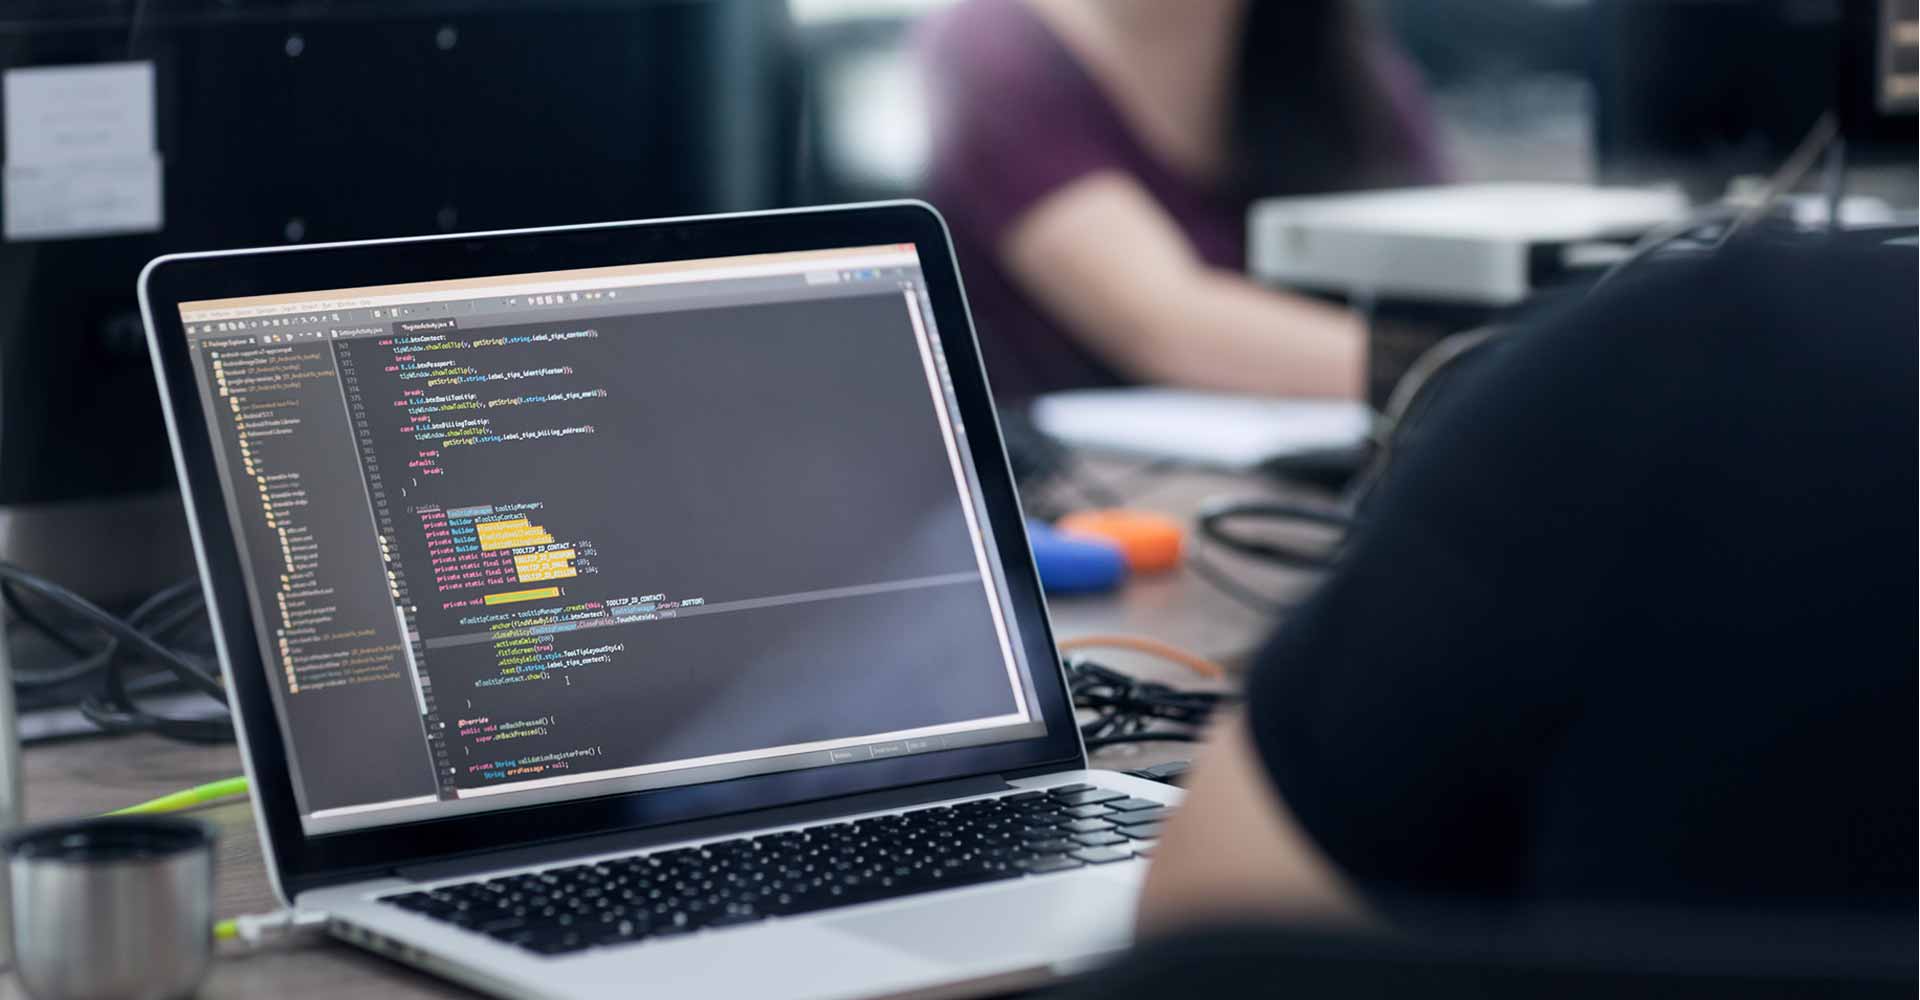 All-in-One Software Development Bundle - 1050+ Courses | 650+ Mock Tests | 5000+ Hours | Lifetime |